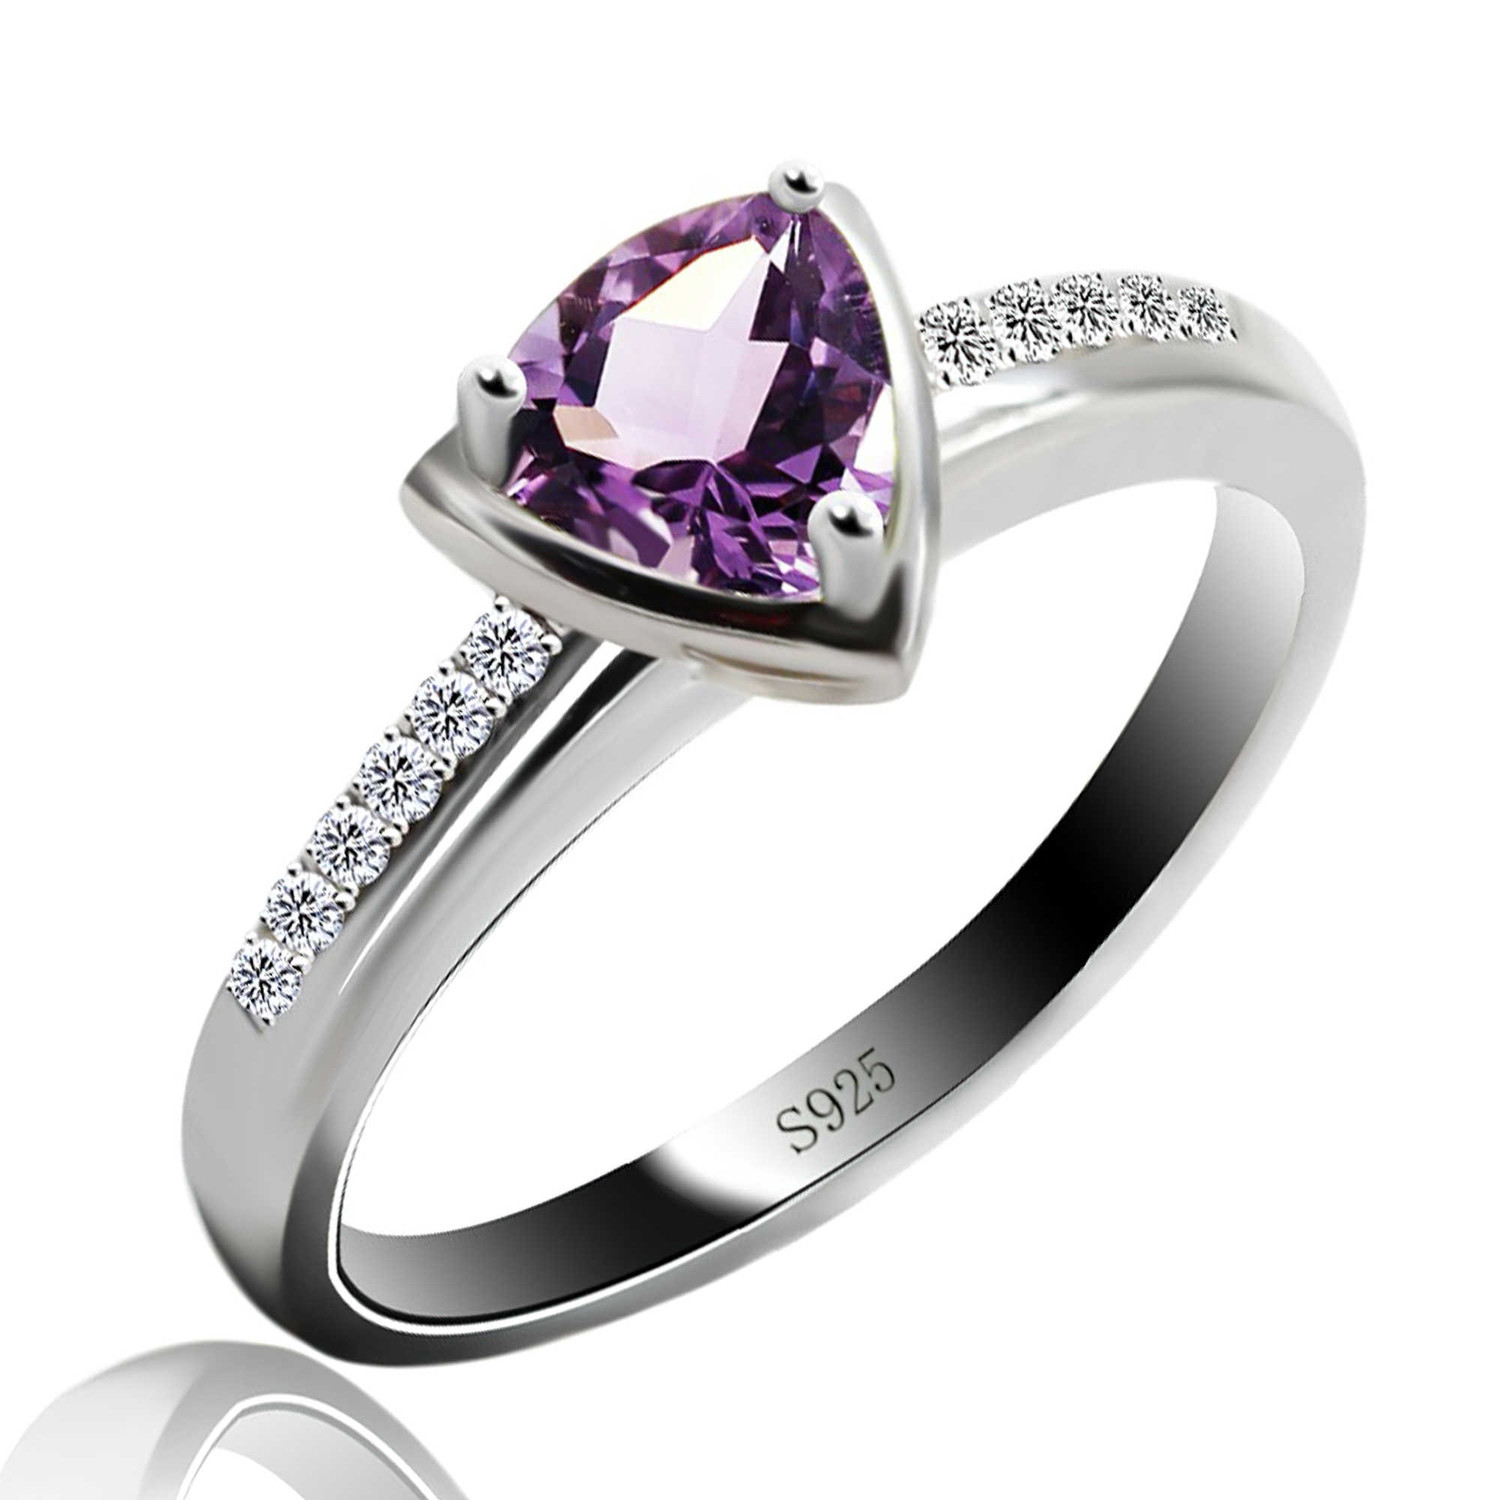 Rhinestone Encrusted Cubic Zirconia Cocktail Ring - Silver /Purple, Size 7  | Silver rings, Cocktail rings, Encrusted